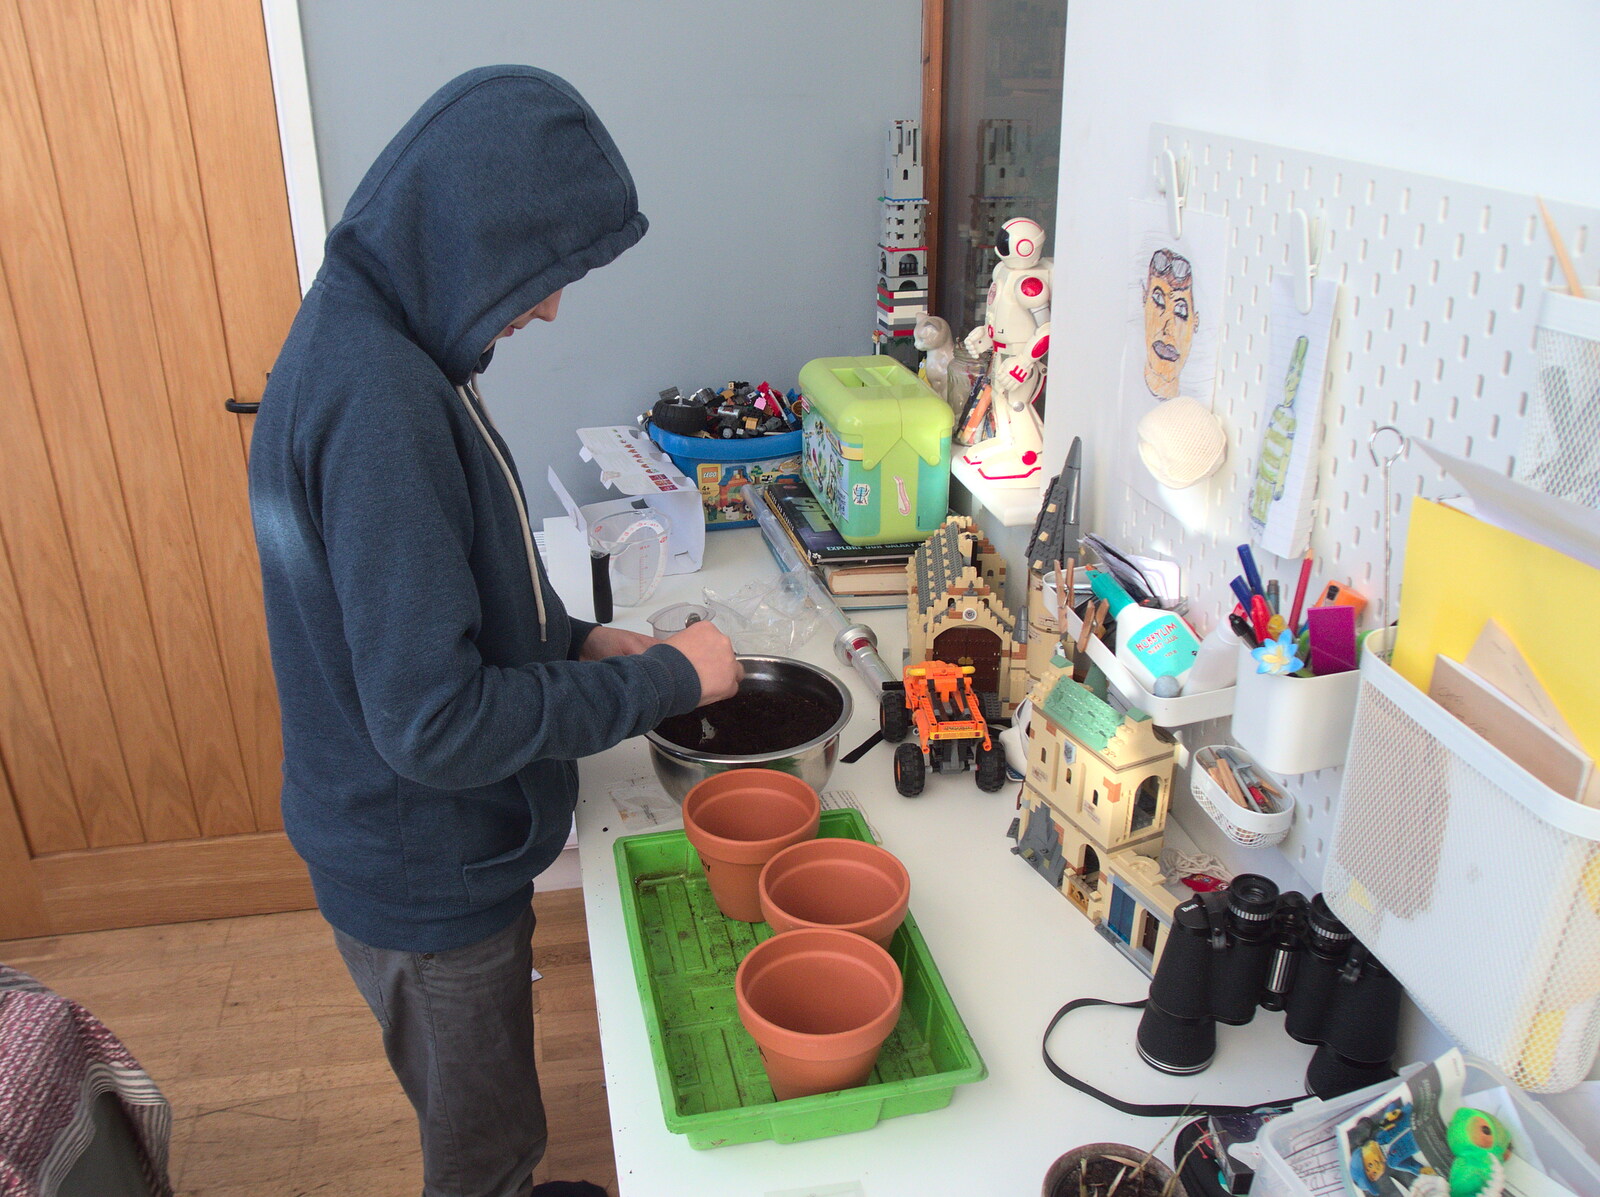 Fred plants some hot chillies from Christmas Day and Other Stuff, Diss, Brome and Norwich - 25th December 2022